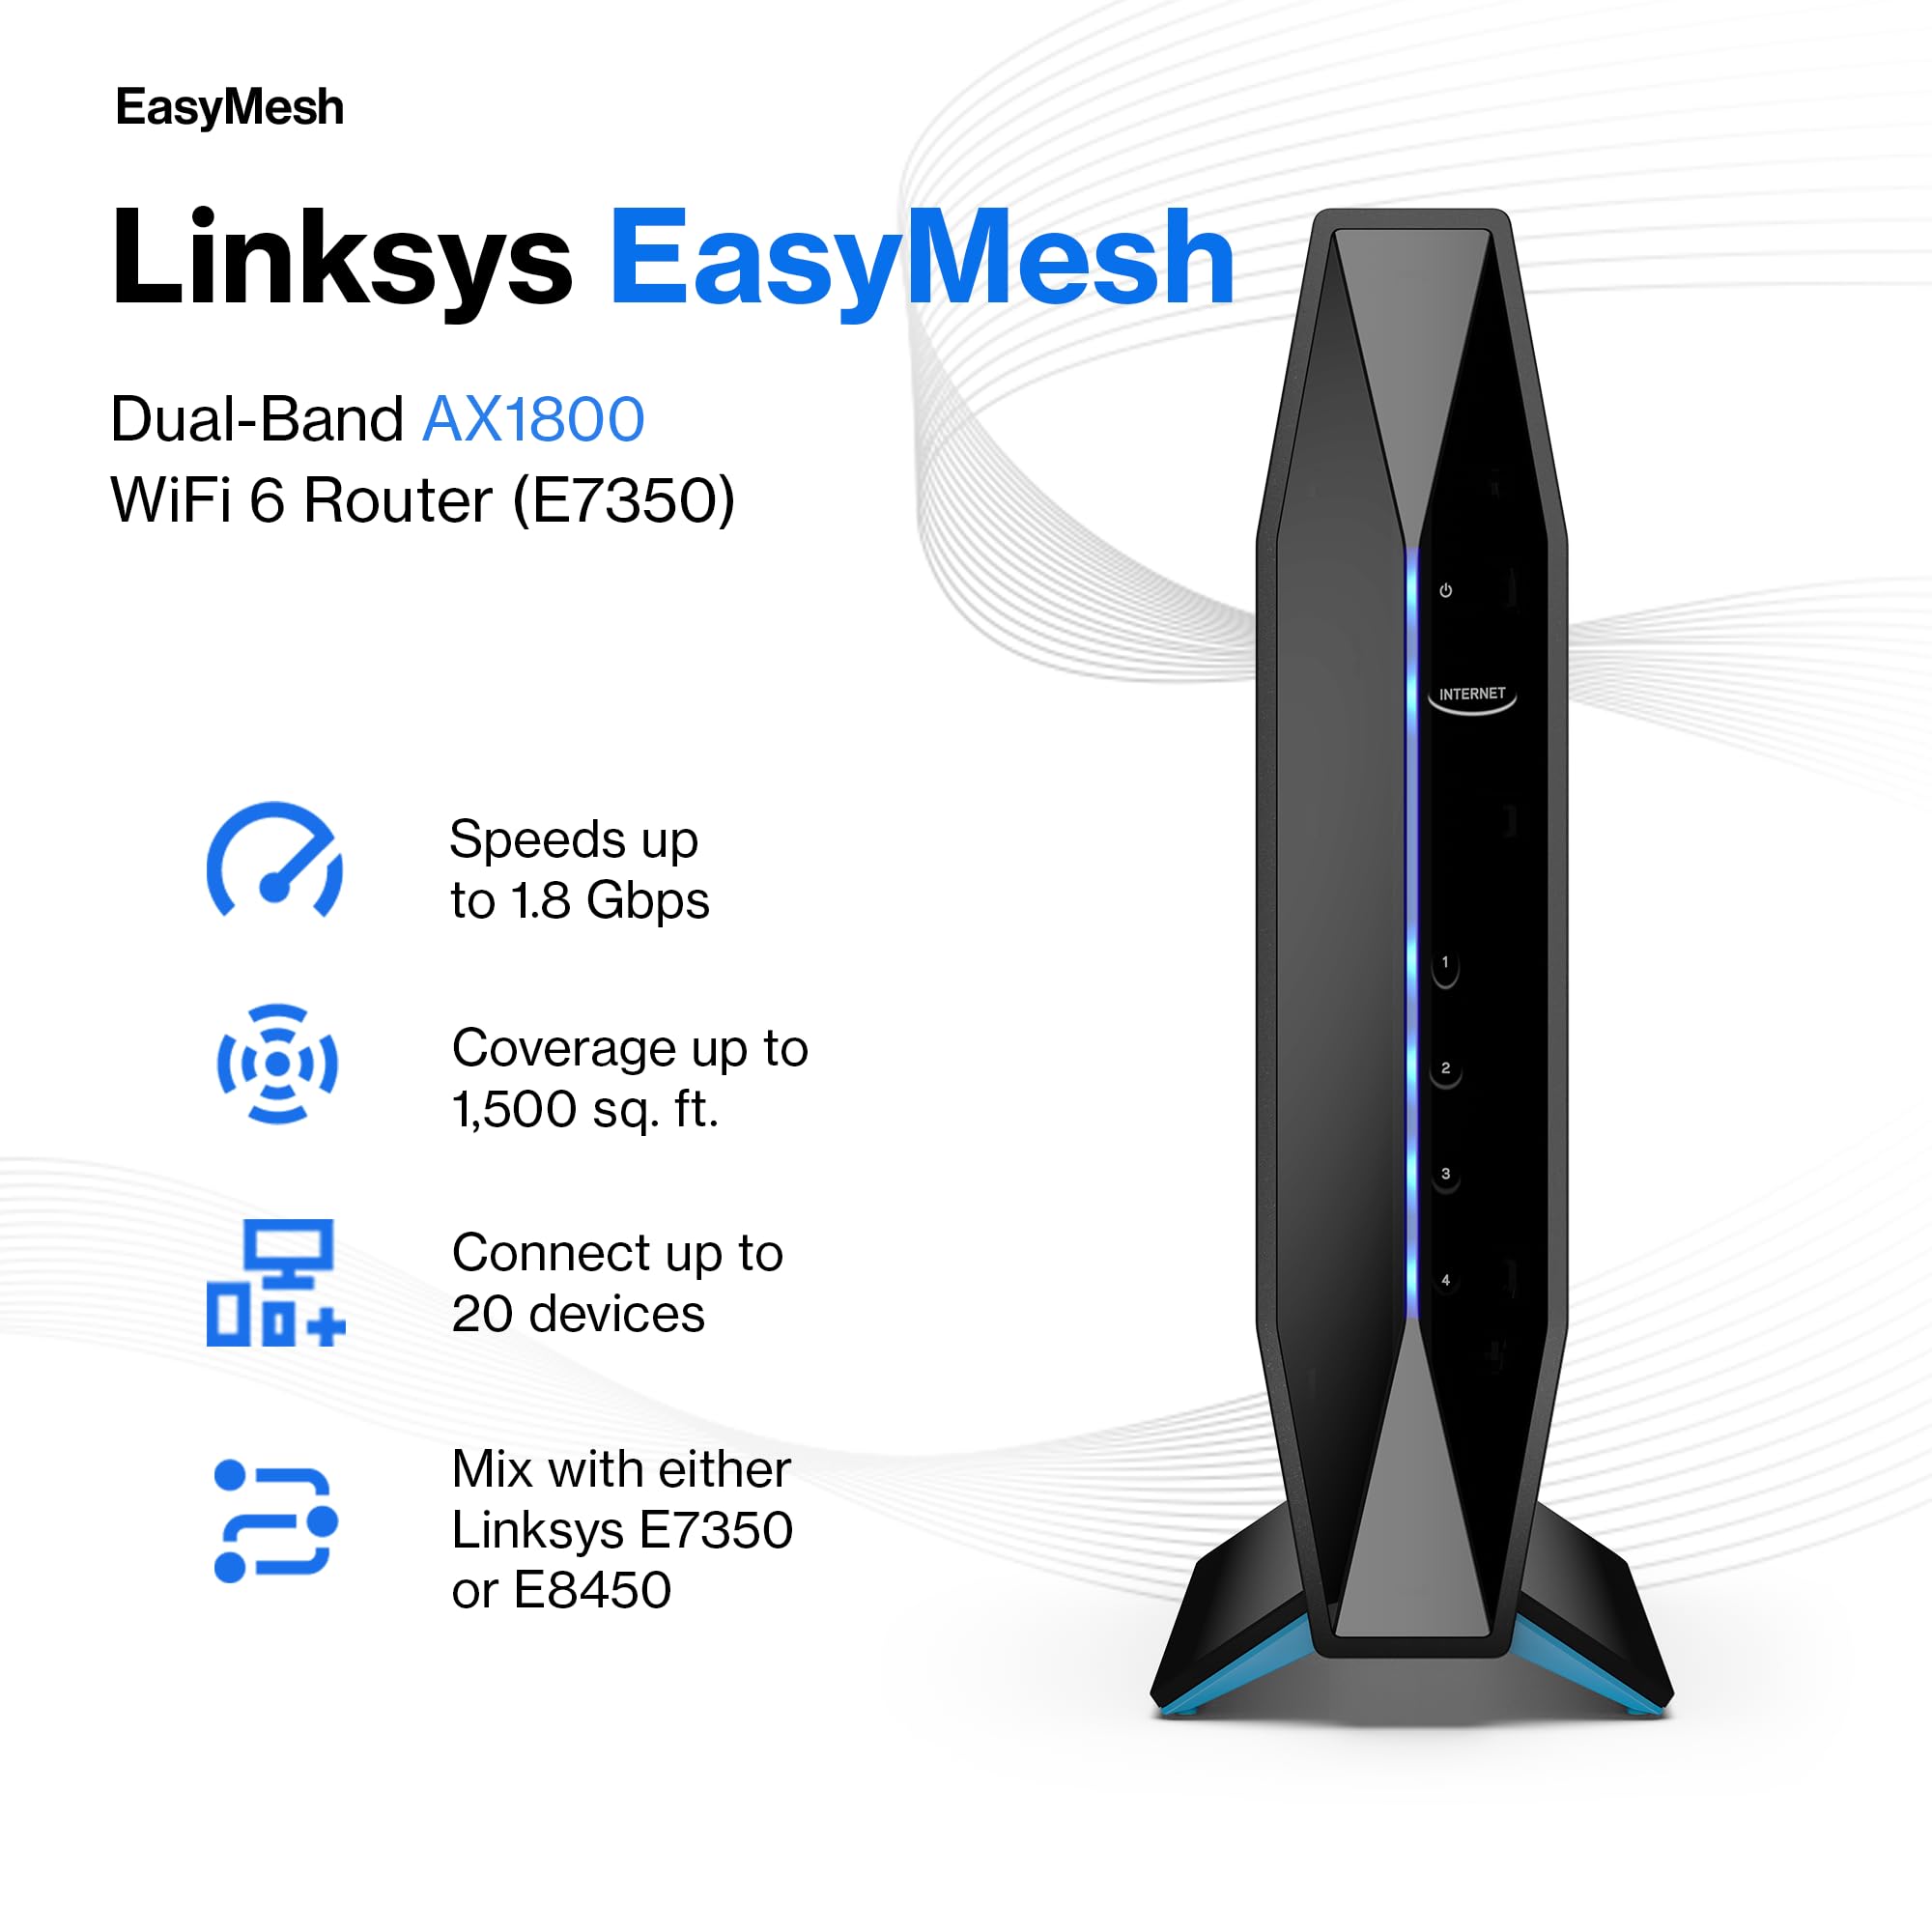 Linksys AX1800 Wi-Fi 6 Router Home Networking, Dual Band Wireless AX Gigabit WiFi Router, Speeds up to 1.8 Gbps and coverage up to 1,500 sq ft, Parental Controls, maximum 20 devices (E7350)